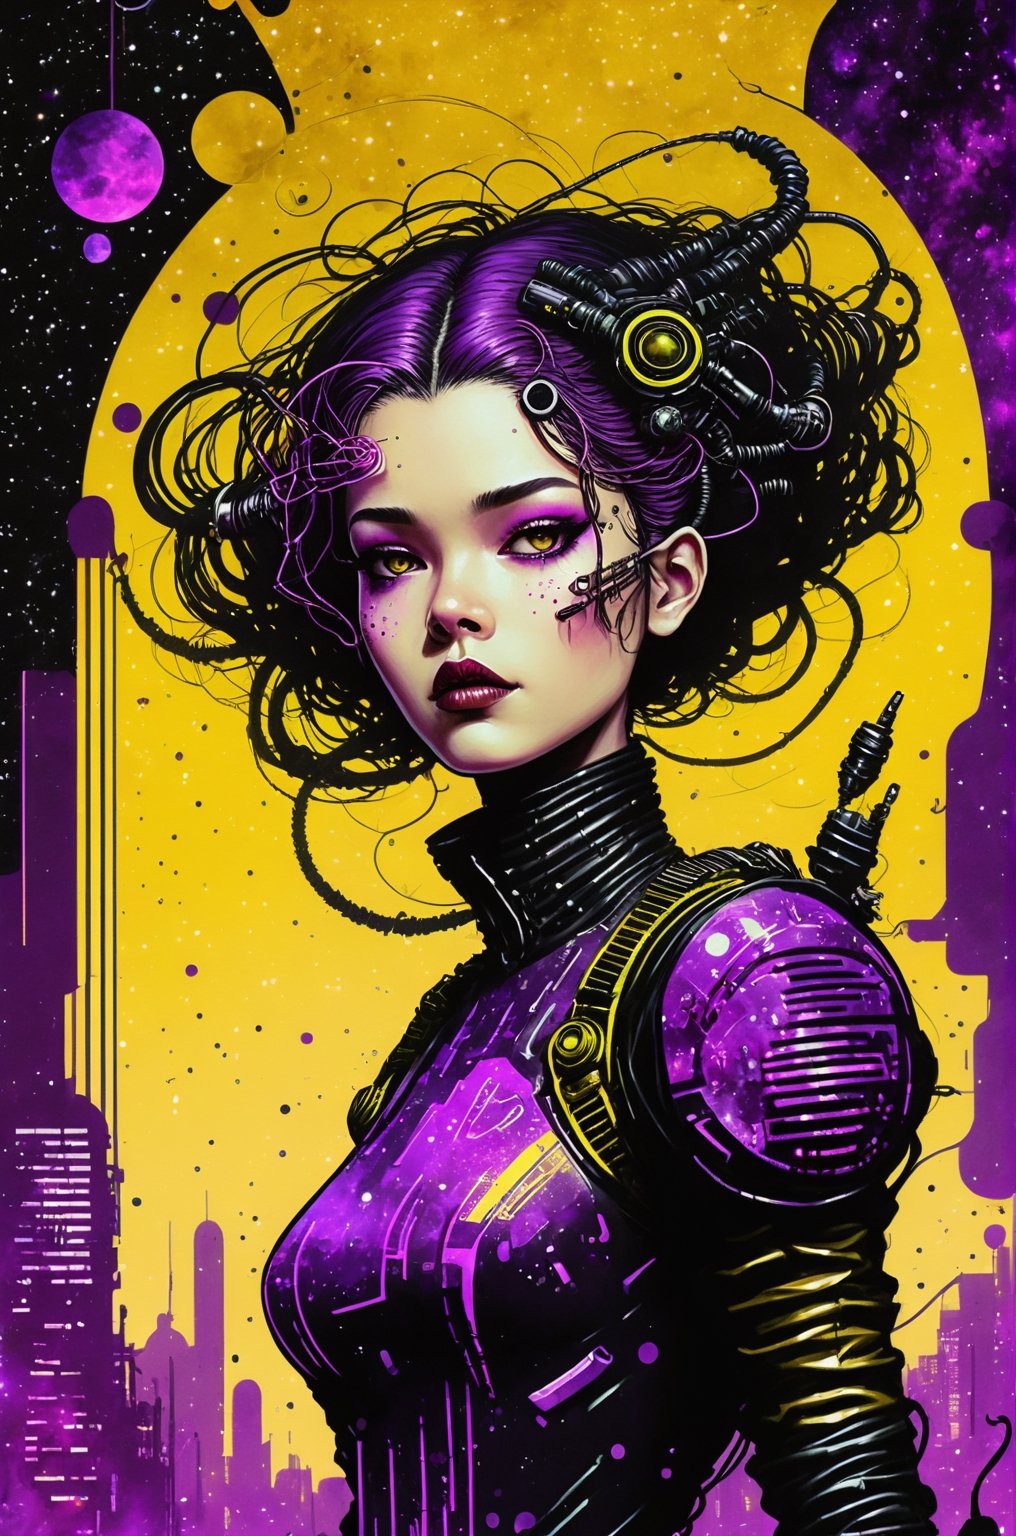 bladerunner filmposter：1 Lady, Starry sky and zodiac signs, Purple hues like nebulae, Vast space, city at the bottom of cyber punk personage, ( Background with:black and yellow Background with1.4), (RHAD:1.2), (artistic décor:1.4), (Retro-Future:1.4), (maximalist:1.4), (Clean:1.4), (Flat_colours:1.4), (cyber punk personage,Android:1.4), CCDDA art style, 

in the style of esao andrews